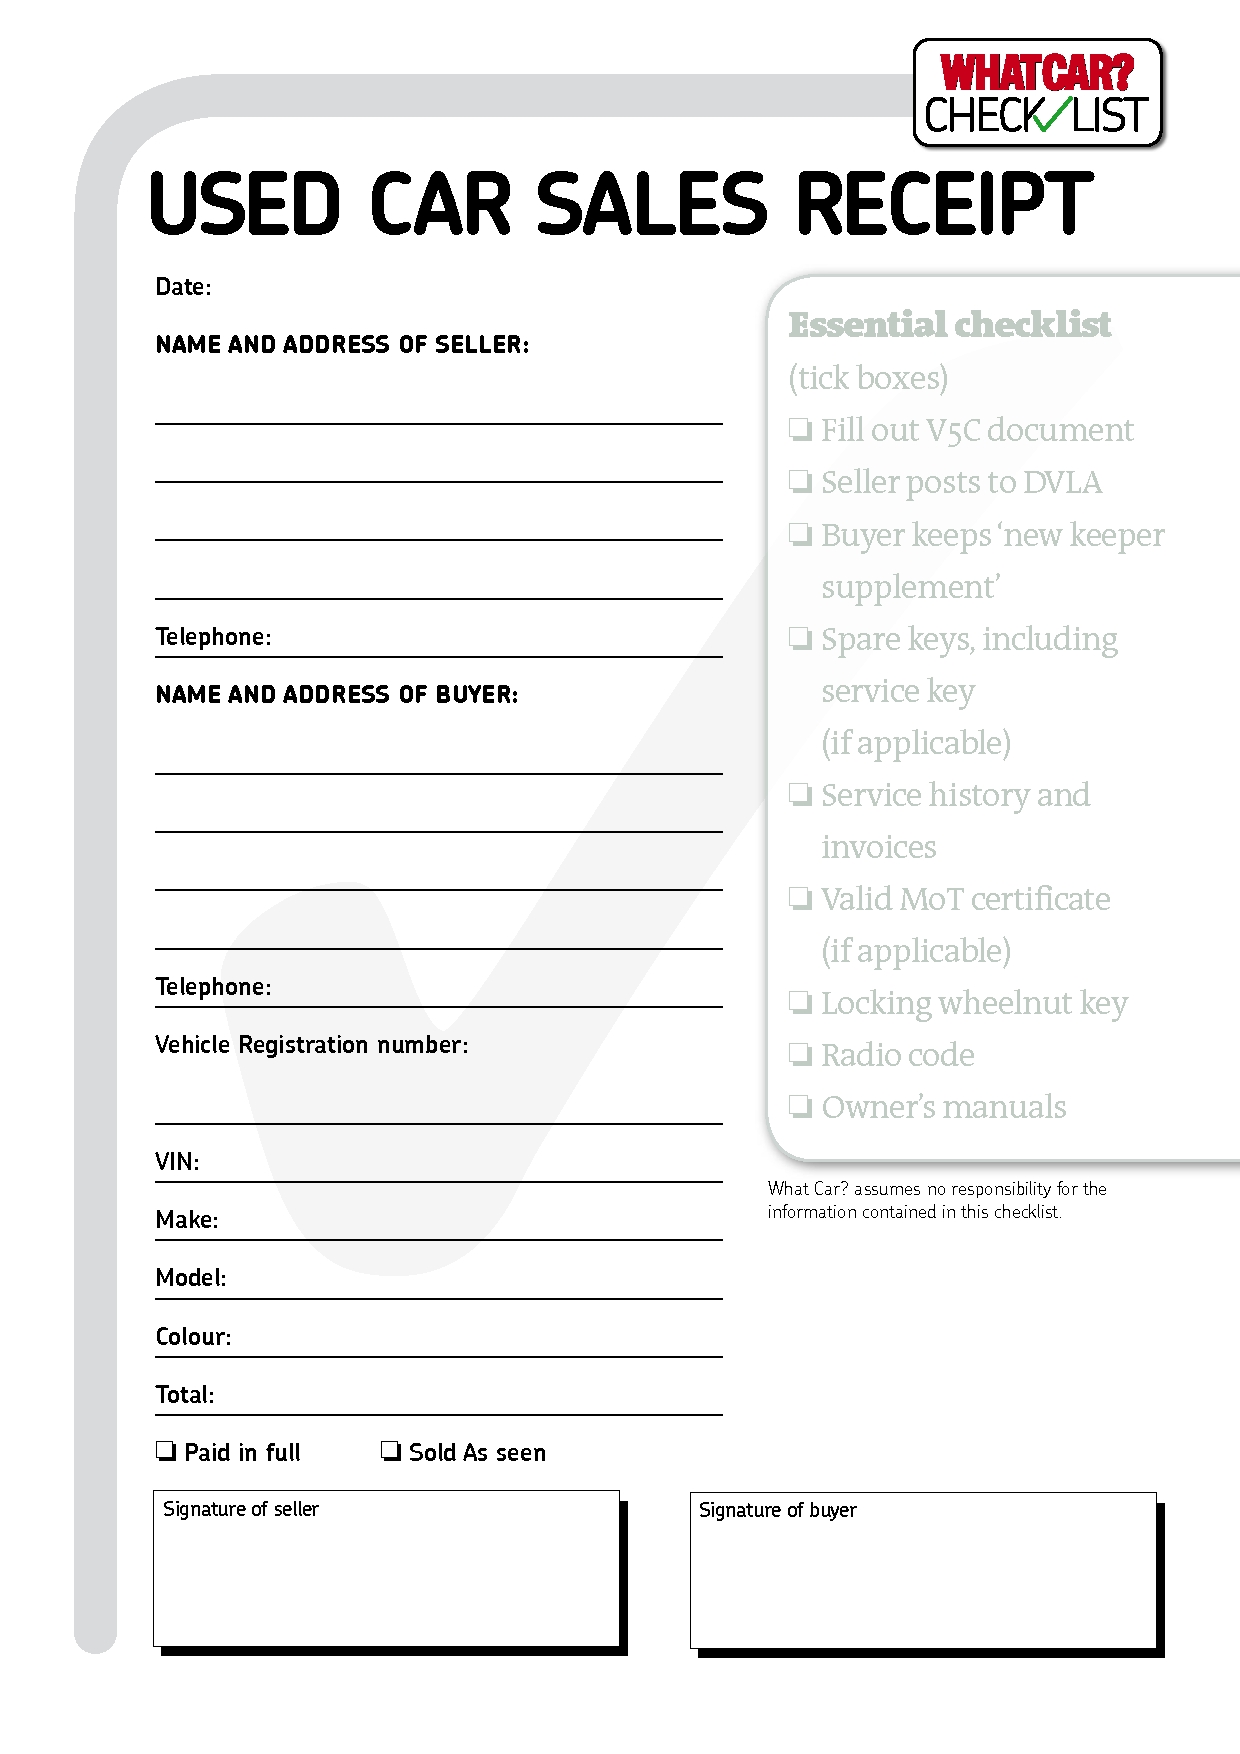 Download Car Sales Receipt Template | PDF | Word wikiDownload